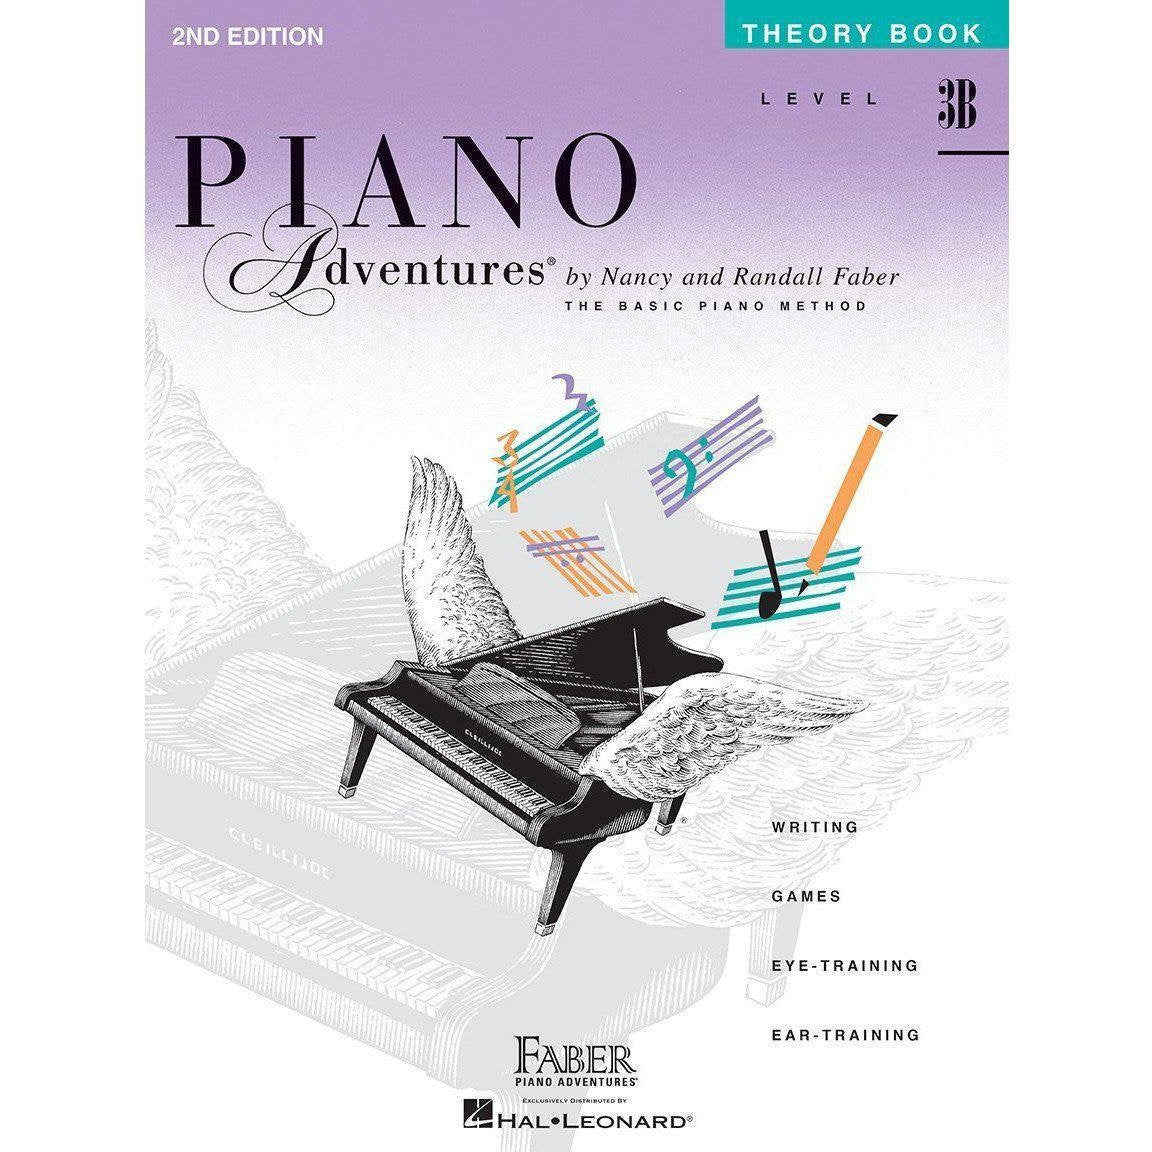 Faber Piano Adventures-3B-Theory-Andy's Music